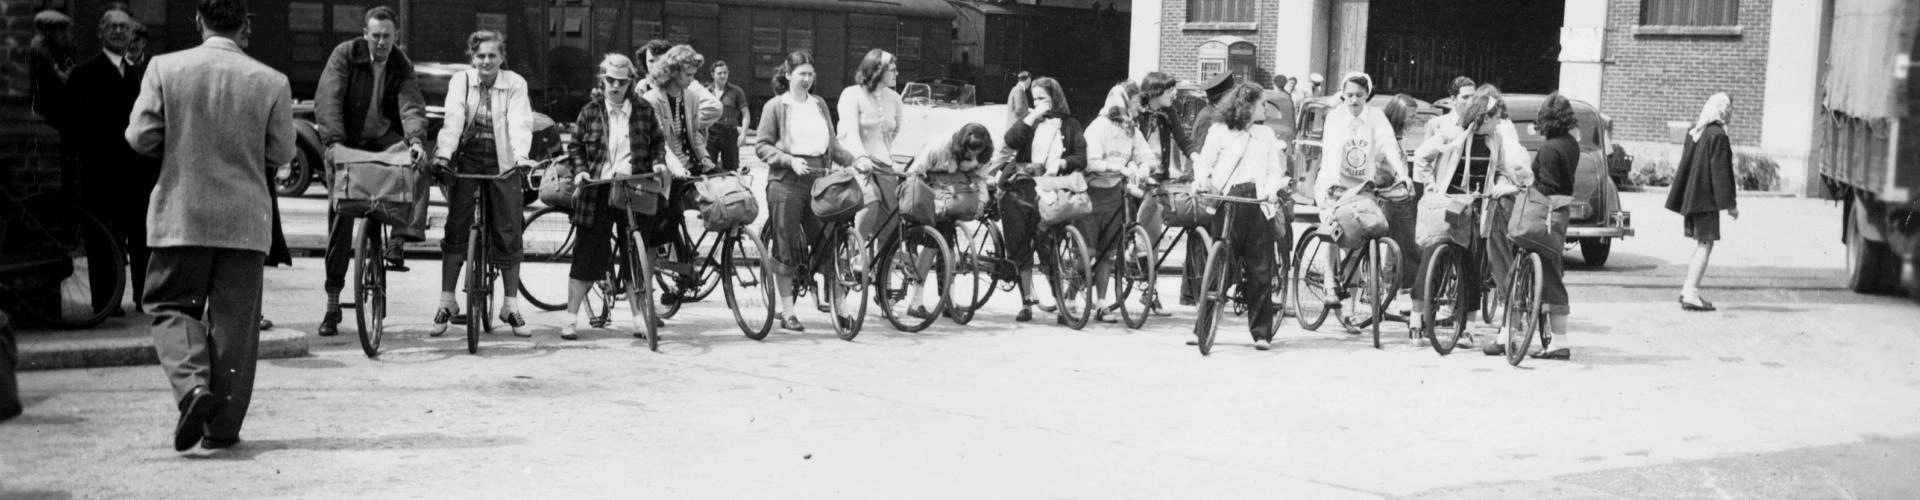 Students ride bicycles in Amsterdam during the 1940s.